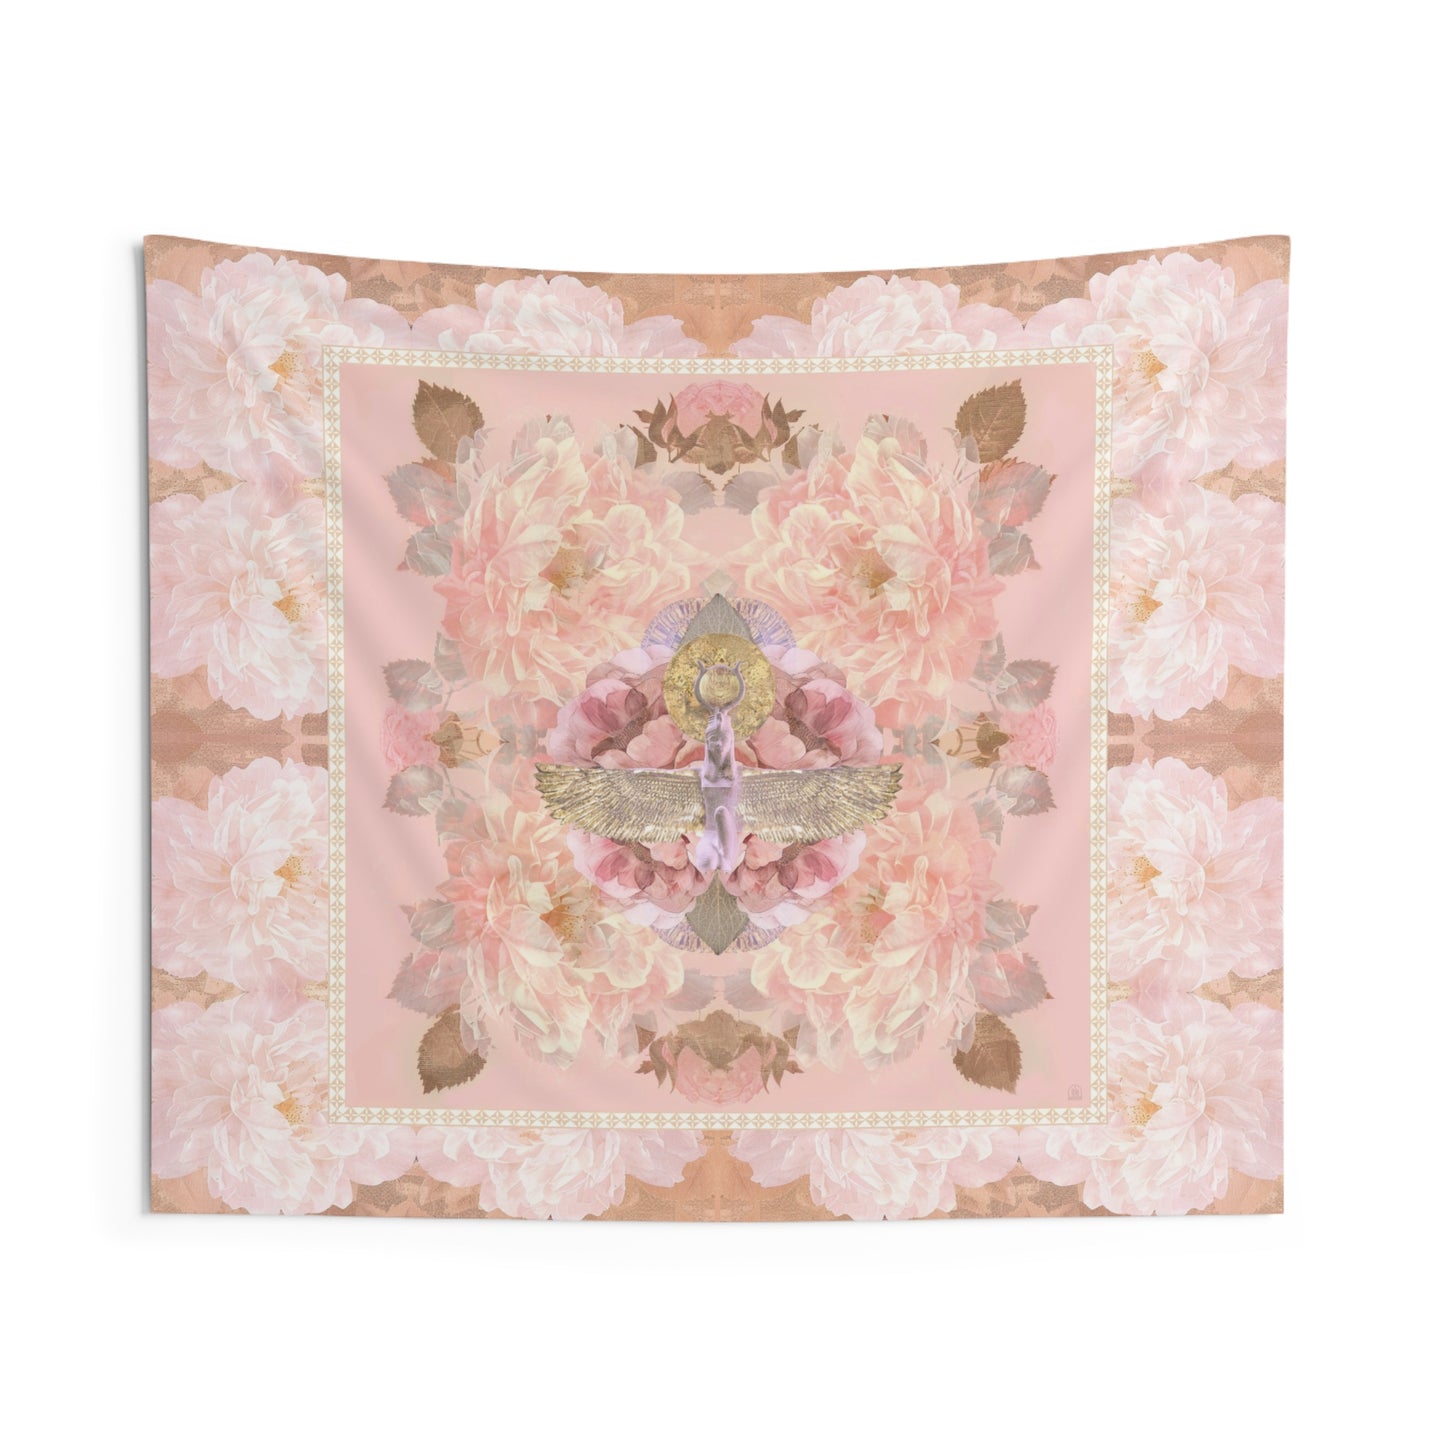 Rose Goddess Wall Tapestry - Starseed Designs Inc.